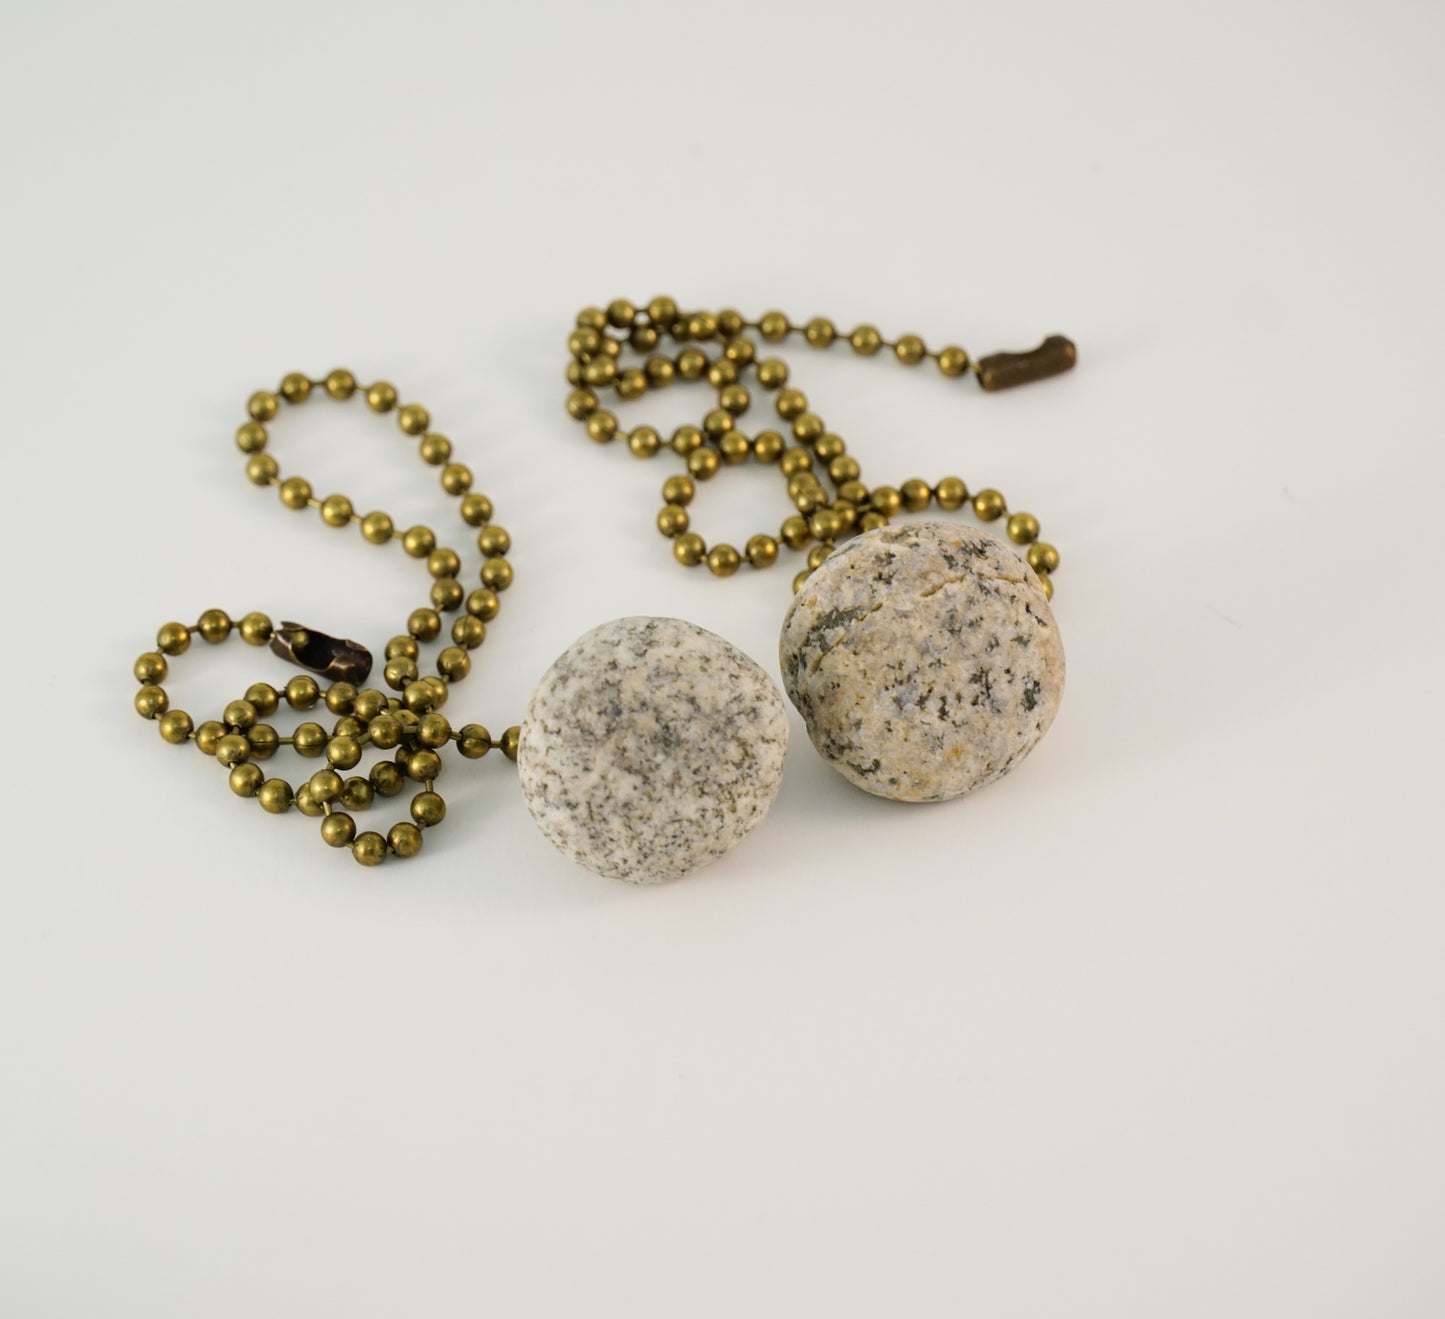 Light and Fan Pulls with Granite Beach Rocks Pebbles